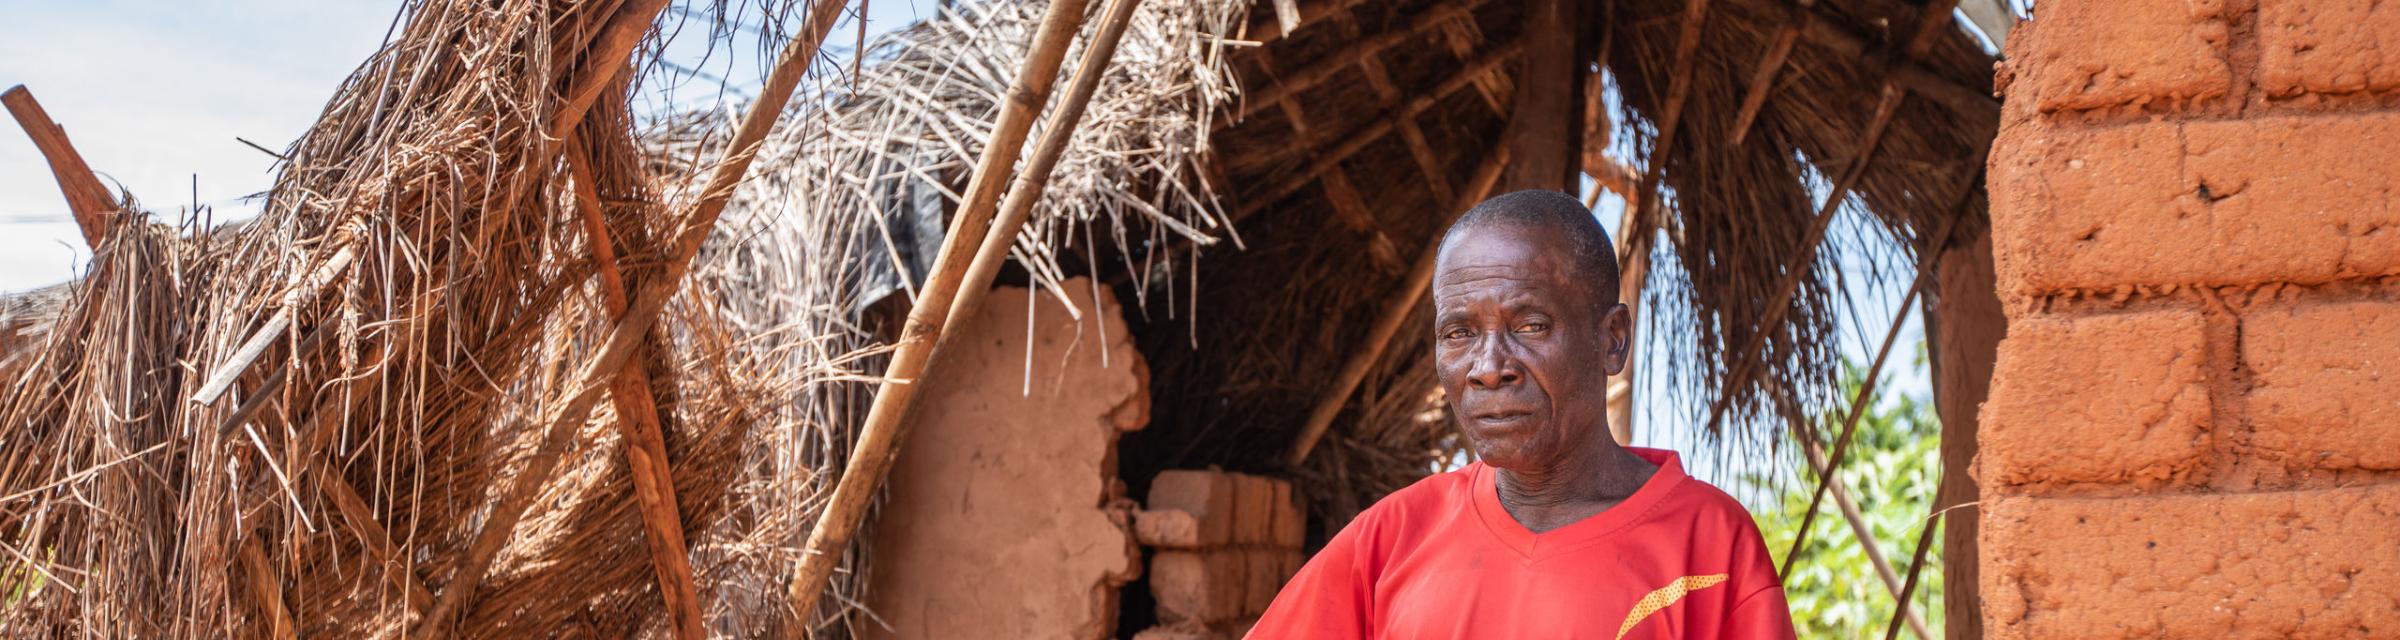 An elder stands in a home in his village that was damaged by the heavy rain and winds of Cyclone Idai in Mozambique. Photo by Rebecca Rempel